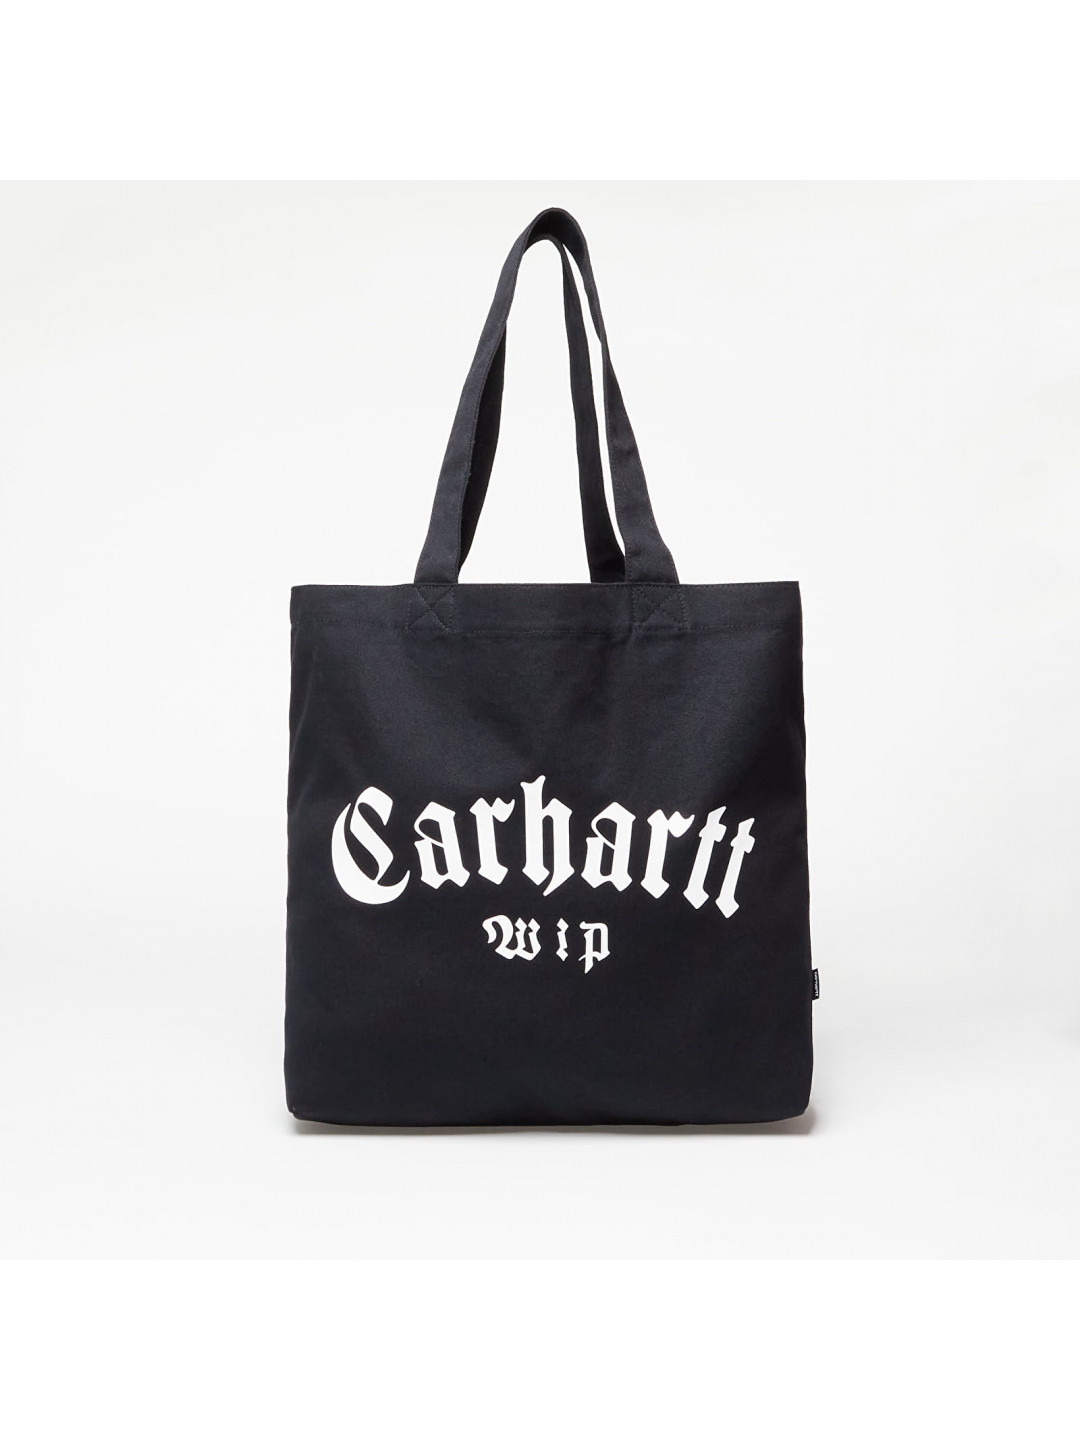 Carhartt WIP Canvas Graphic Tote Large Onyx Print Black White